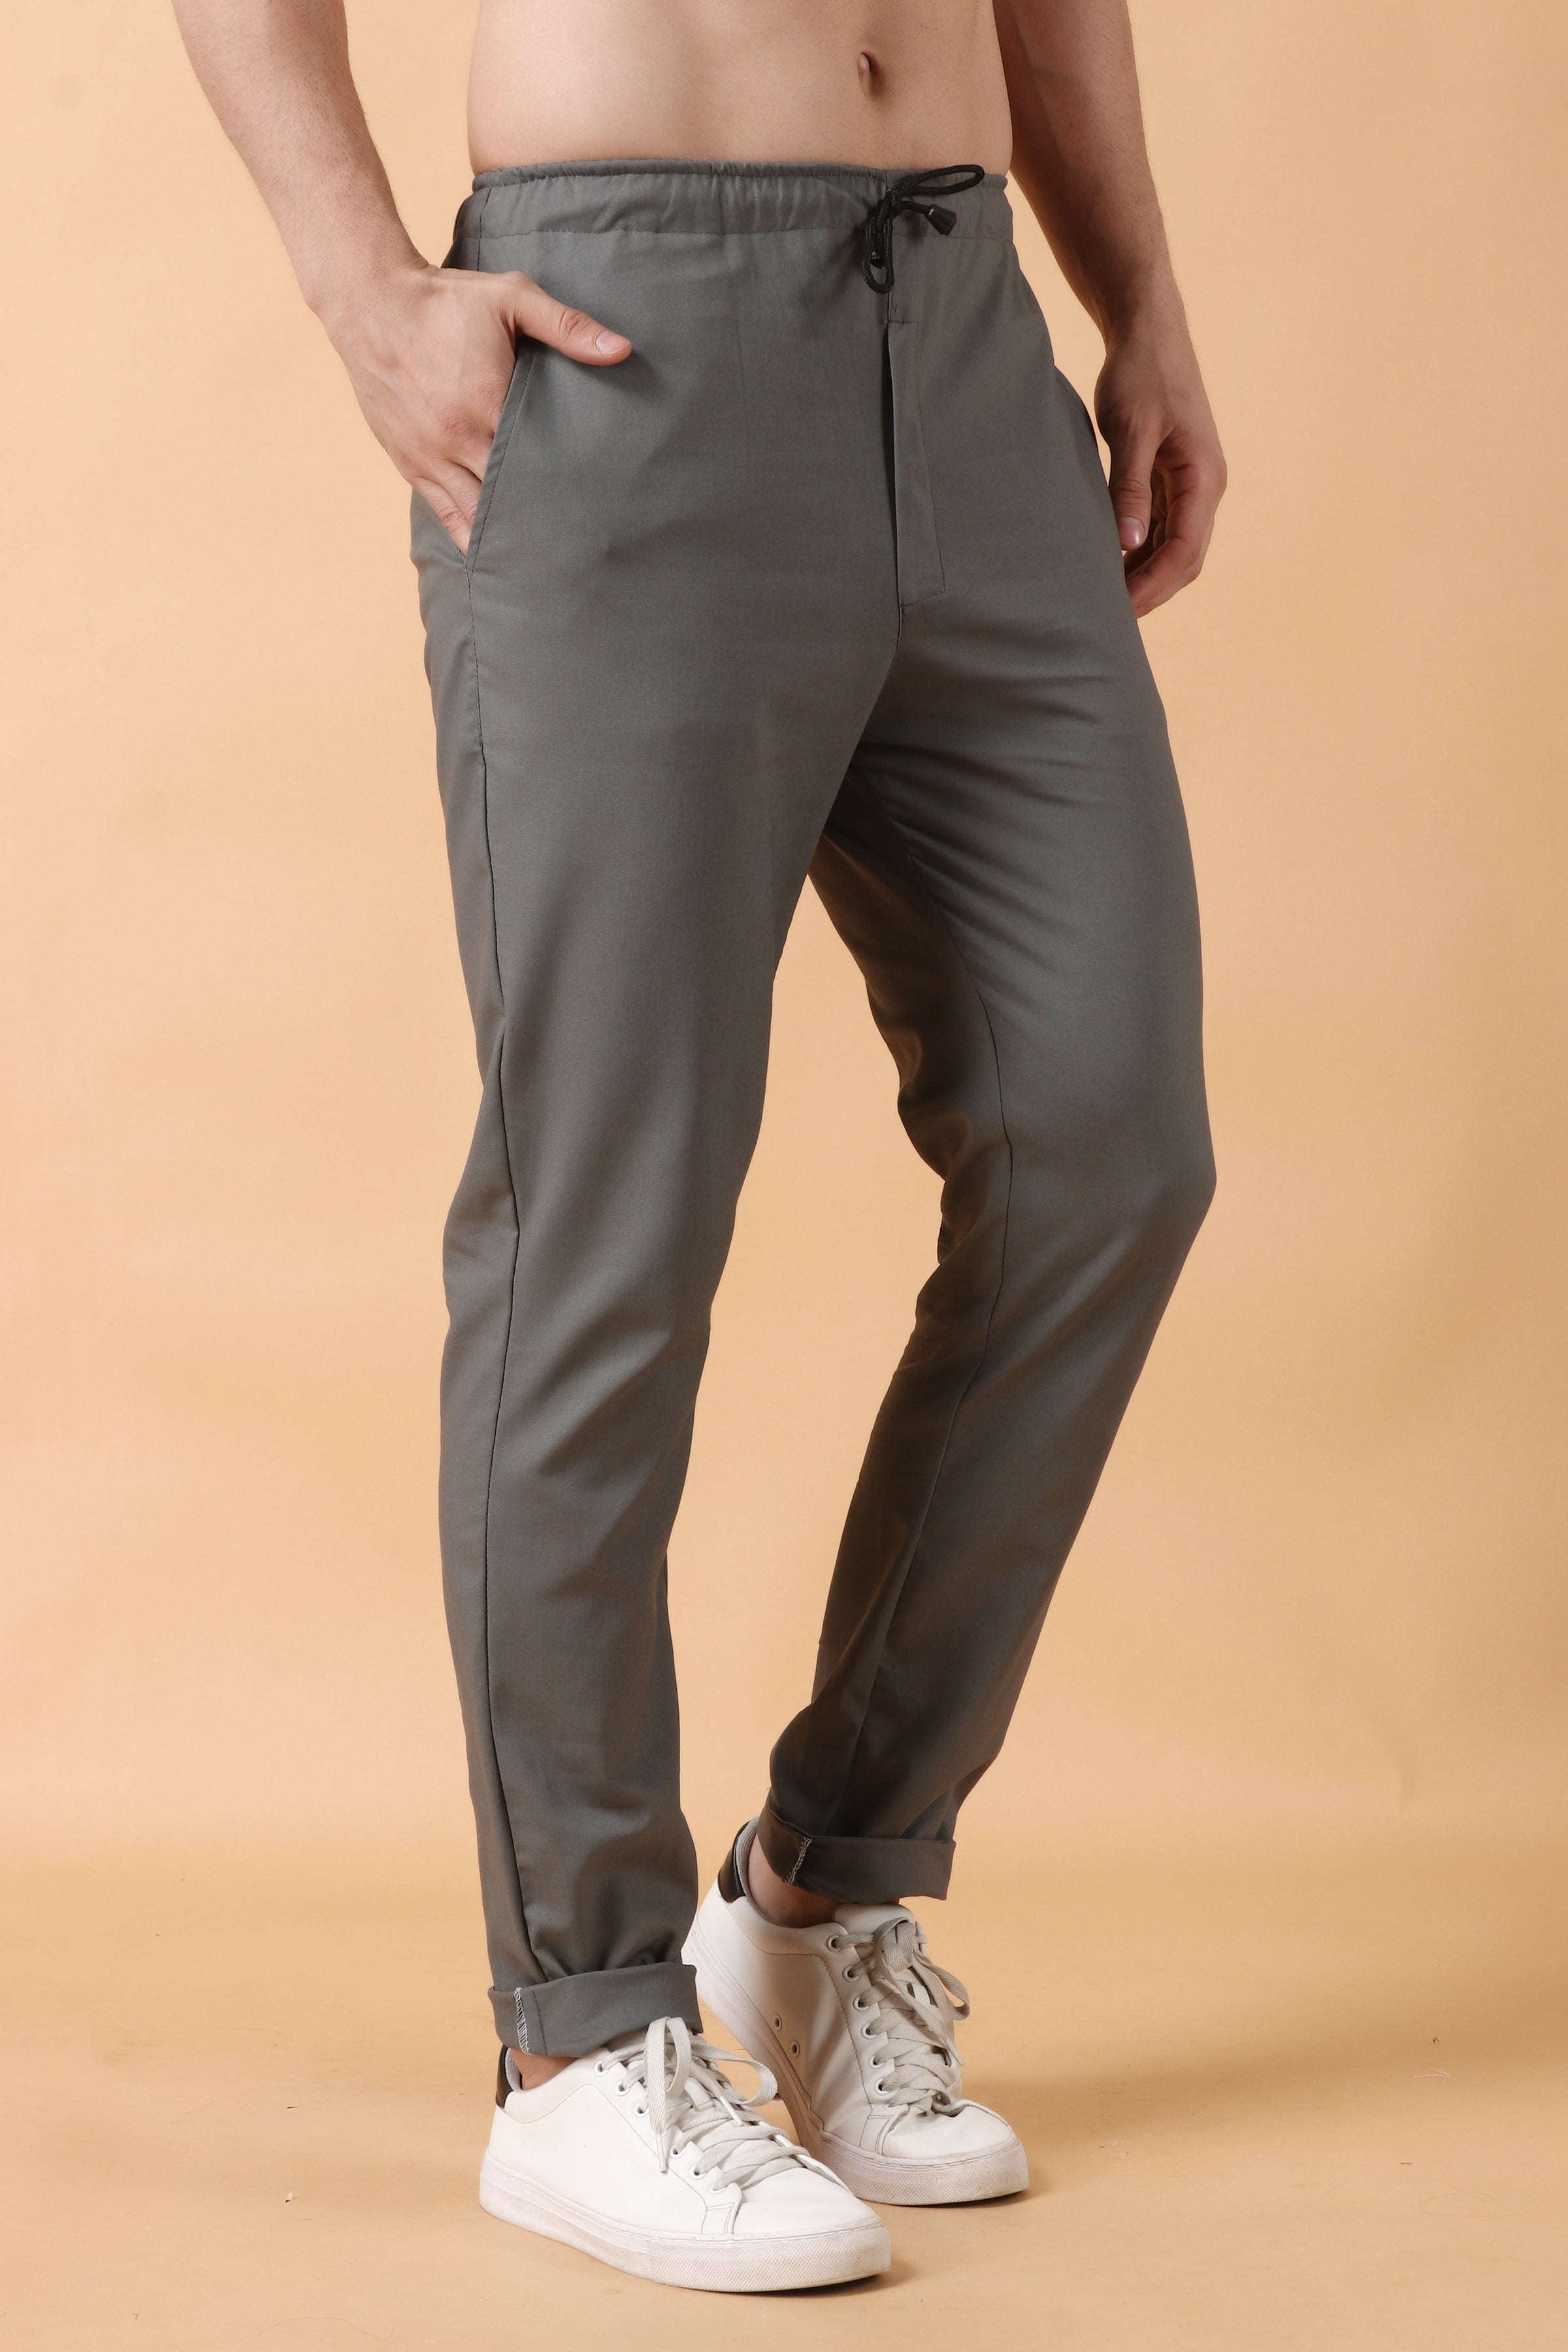 Buy online Grey Solid Cargo Trousers from Bottom Wear for Men by Beevee for  1099 at 50 off  2023 Limeroadcom